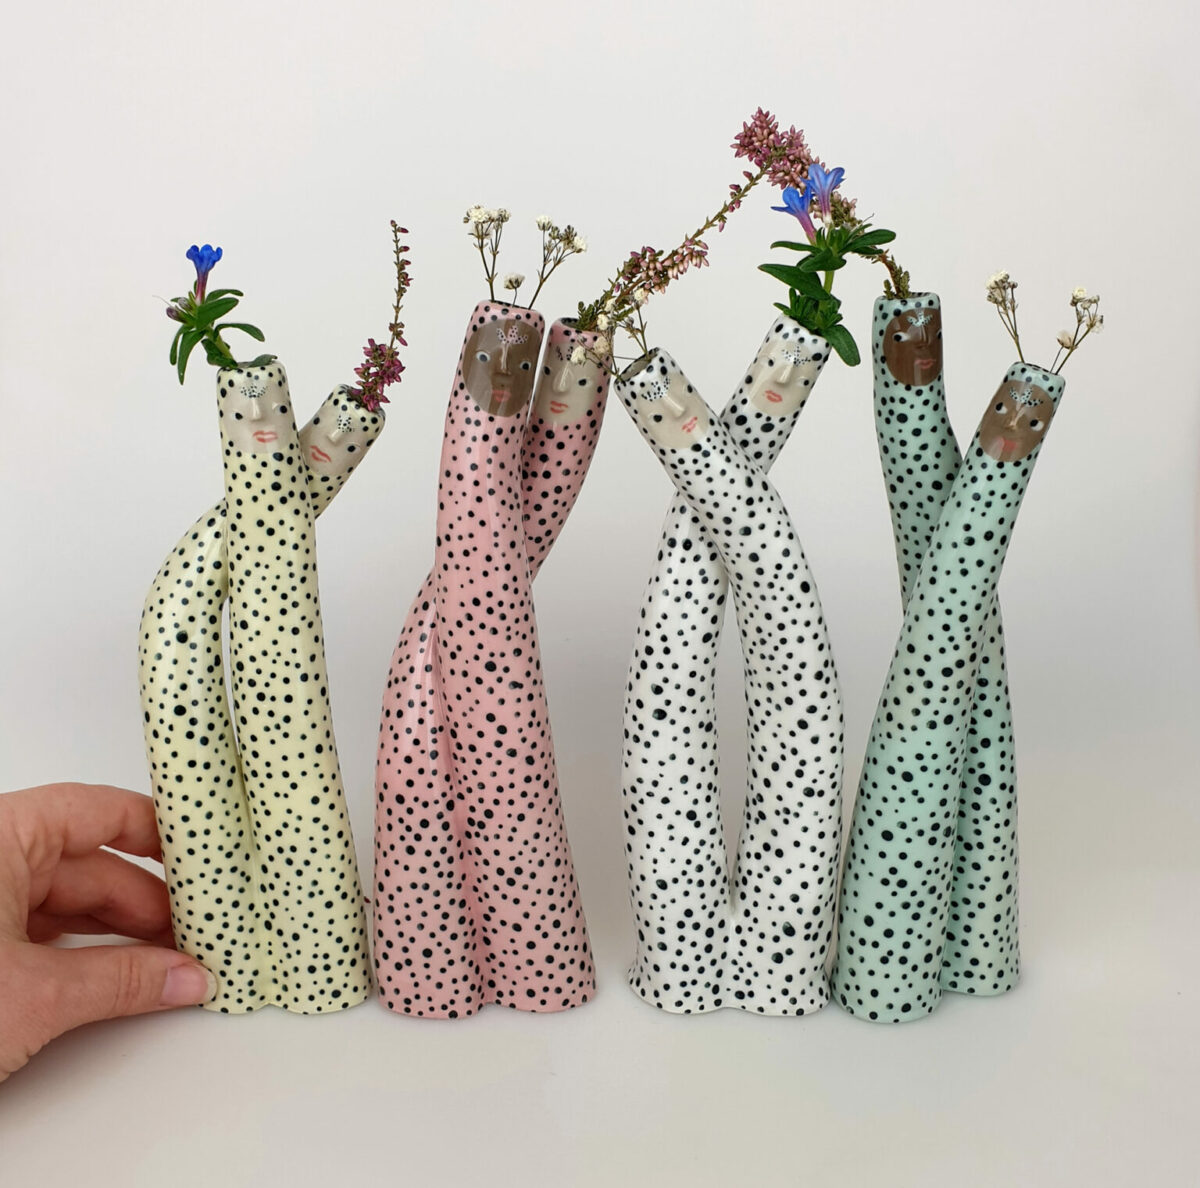 Lovely Porcelain Pieces Patterned With Quirky Cartoon Like Figures By Sandra Apperloo 5